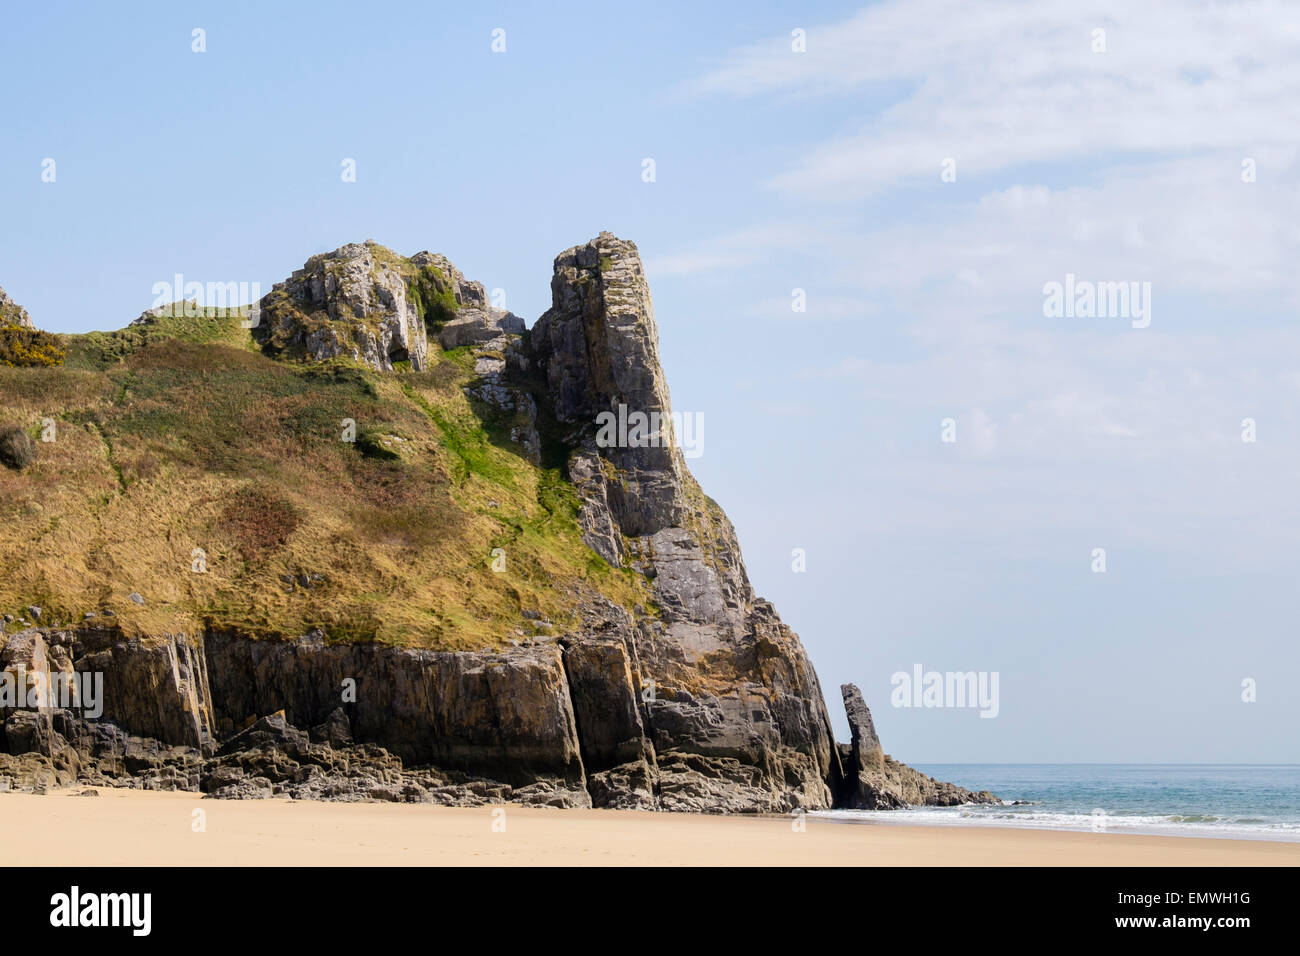 Tor Bay cove beach and Great Tor limestone rocky headland in Oxwich Bay. Gower Peninsula Swansea West Glamorgan South Wales UK Stock Photo